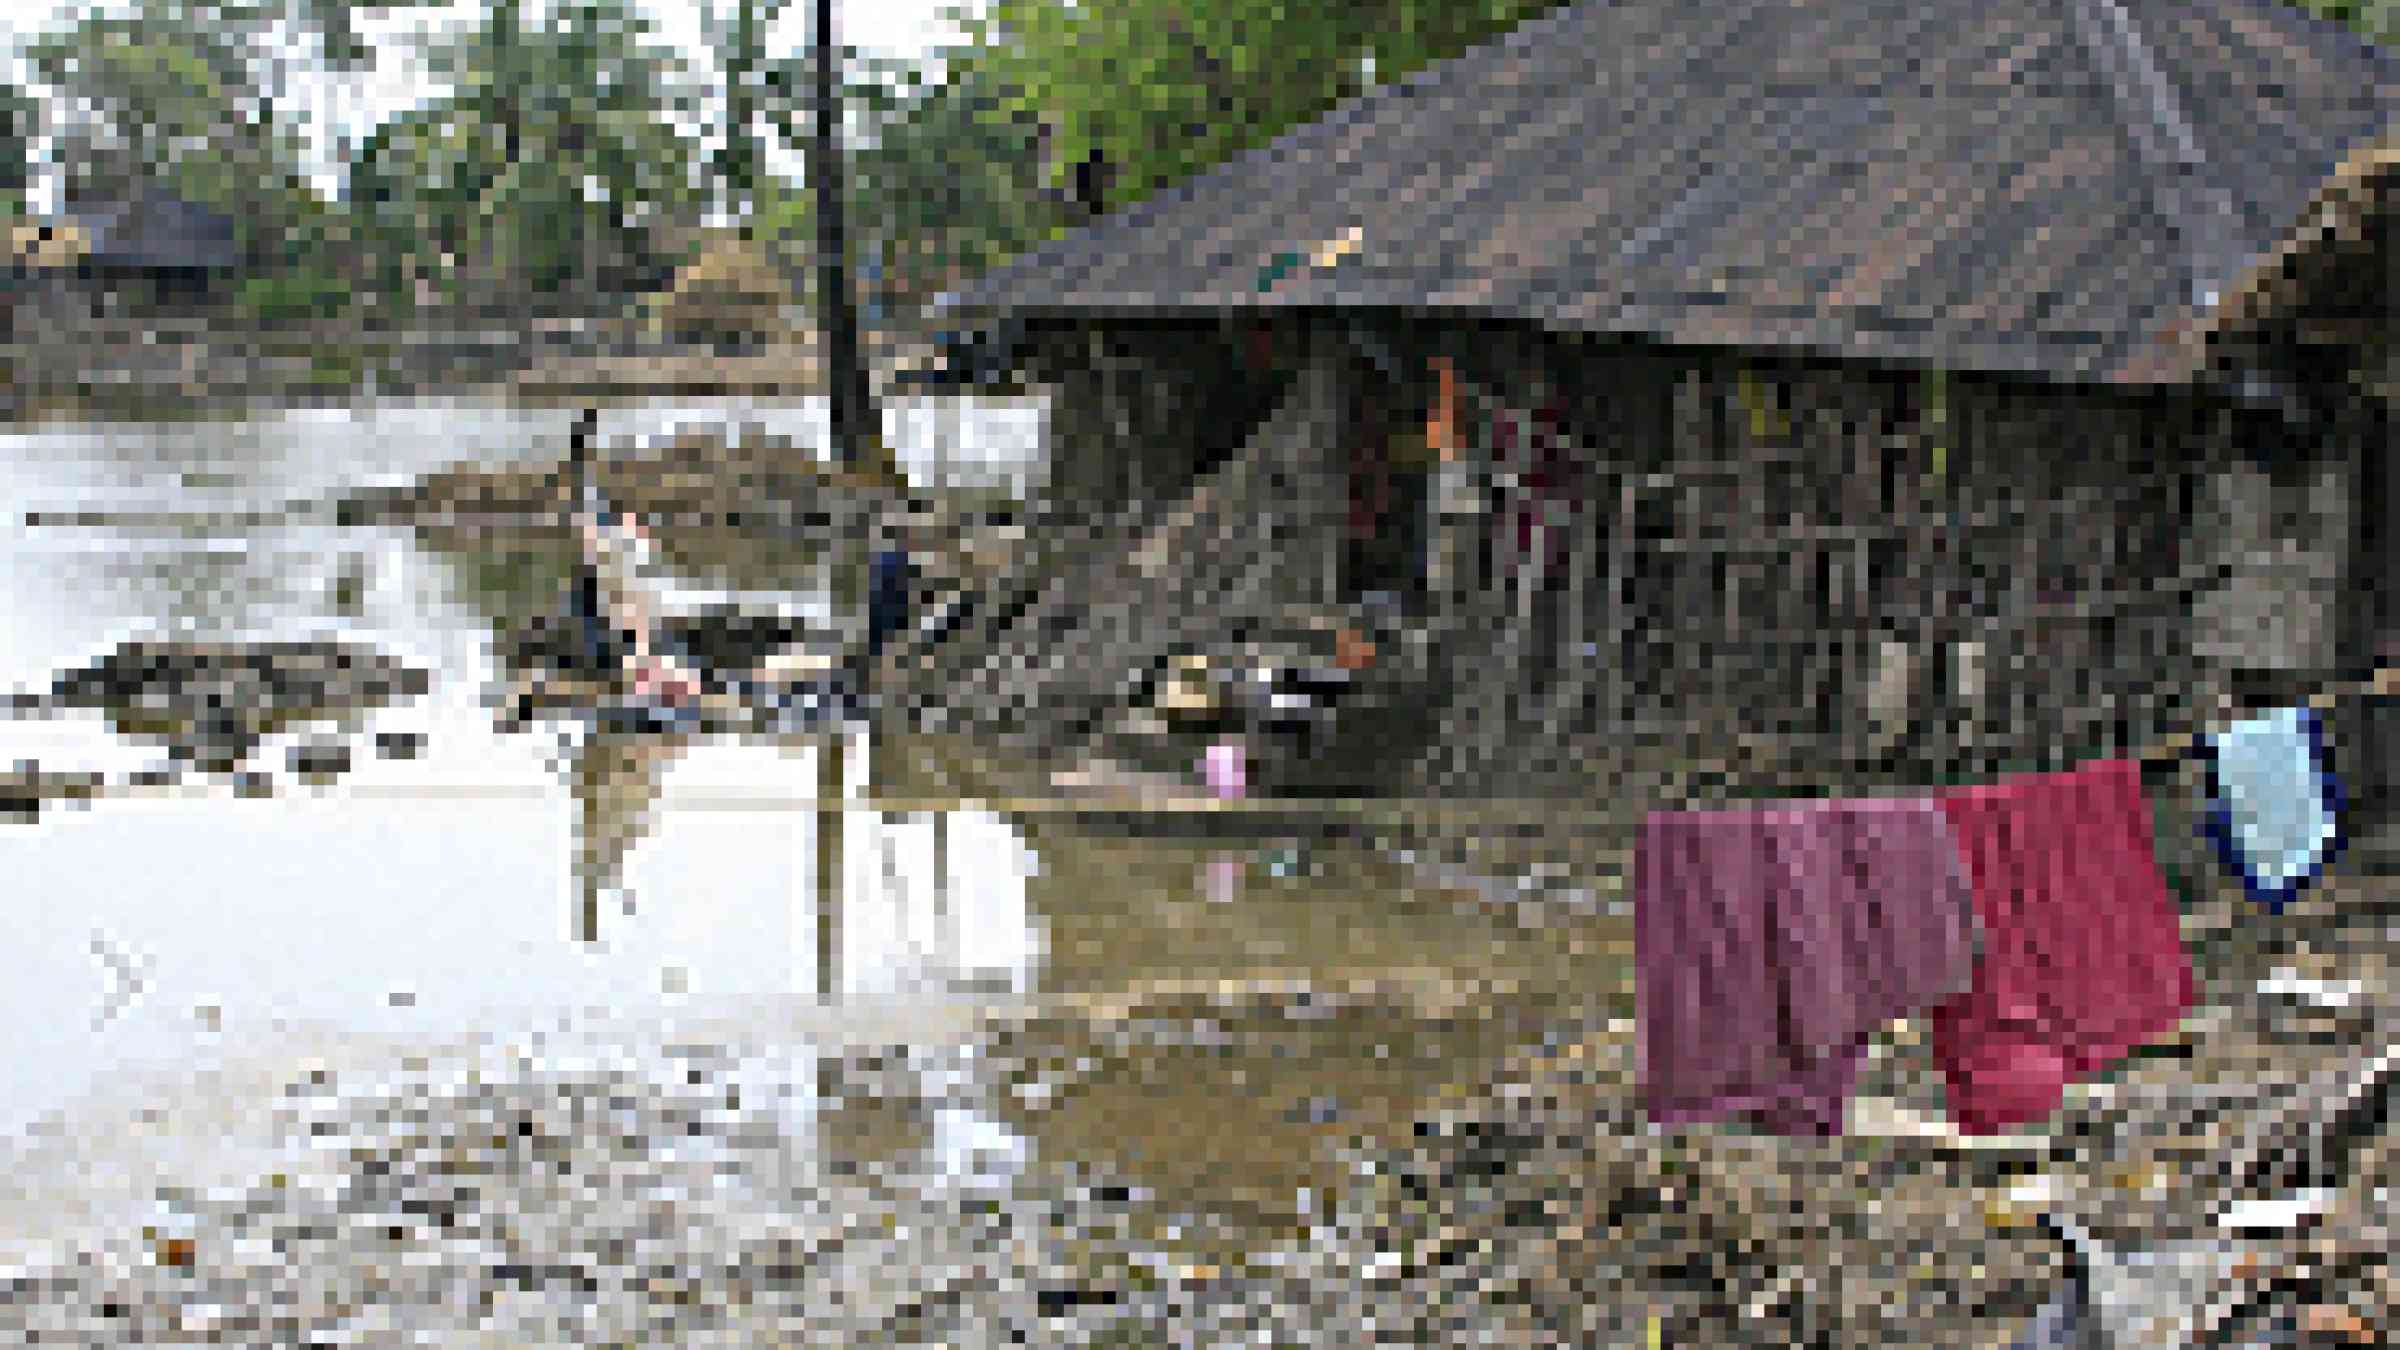 Photo of destroyed house from Sunderbans cyclone, West Bengal, India by Flickr user, Wil Wright, Creative Commons Attribution-Noncommercial-Share Alike 2.0 Generic, http://www.flickr.com/photos/wilwright/3621894975/